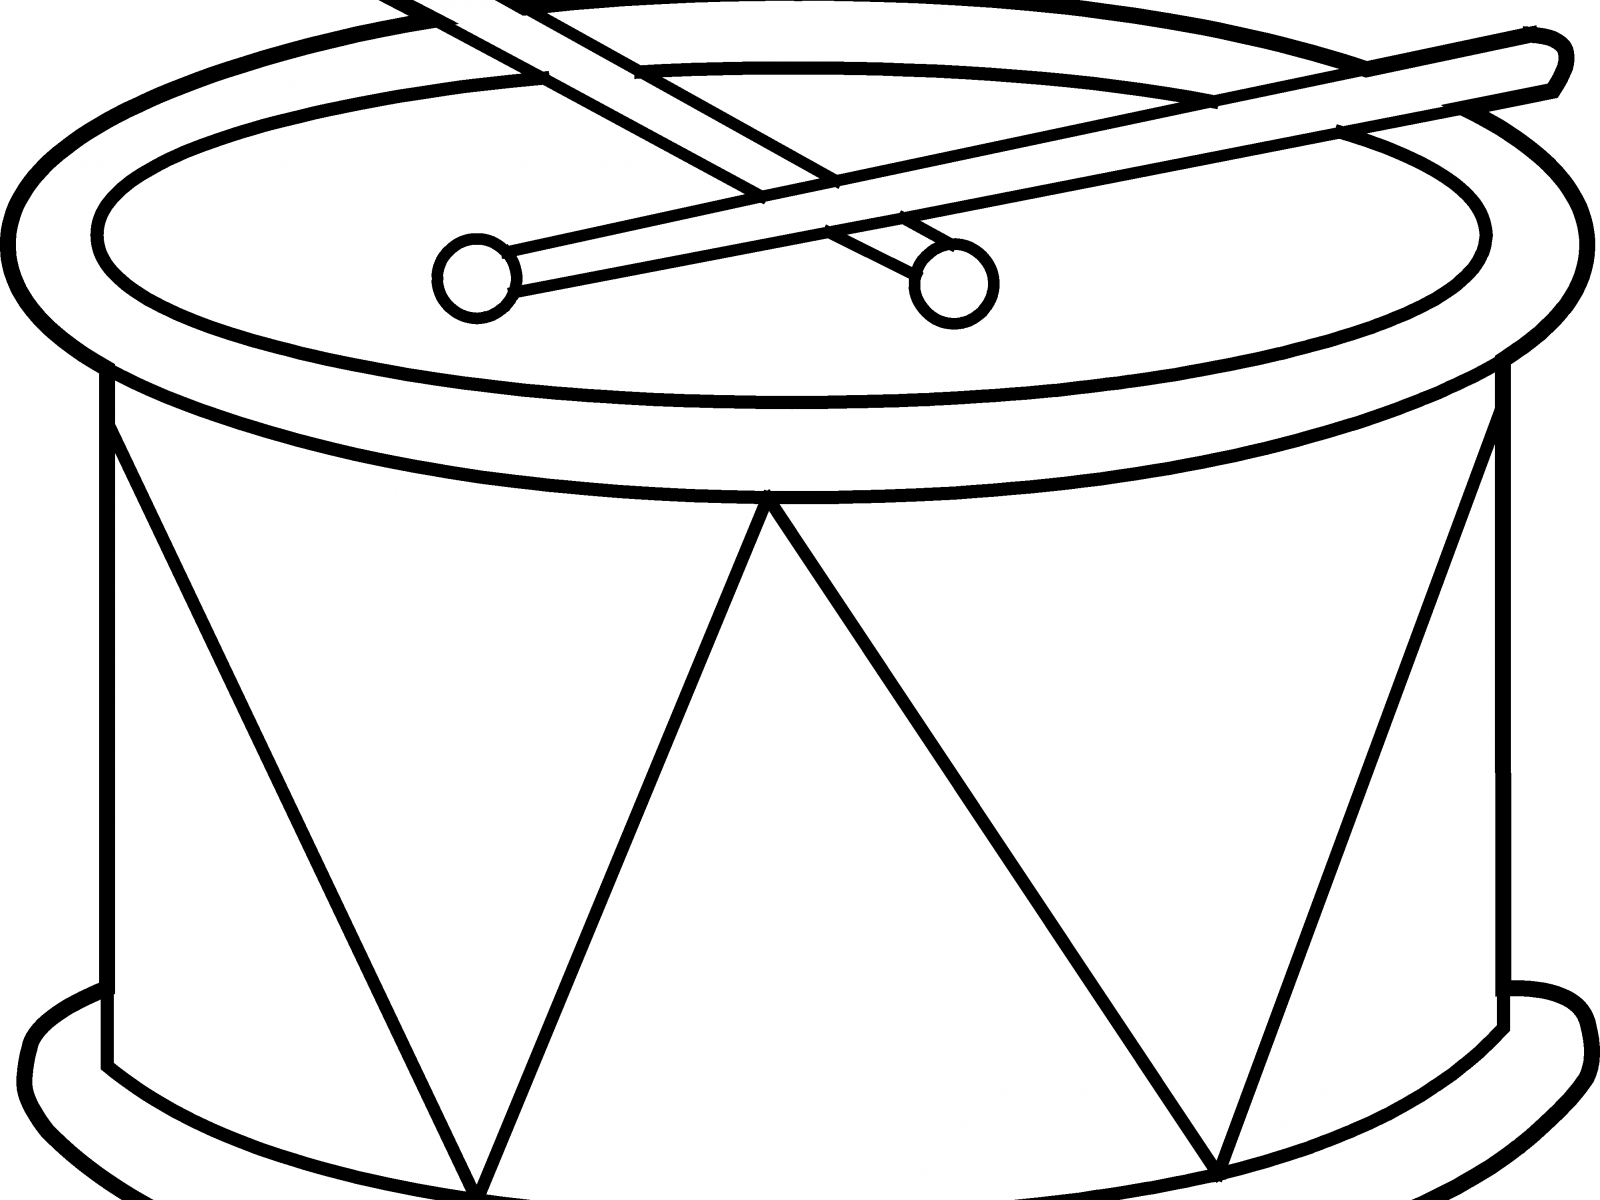 Bongo Drums Coloring Page Free Printable Drum Pages - Drum Coloring Page (1600x1200)